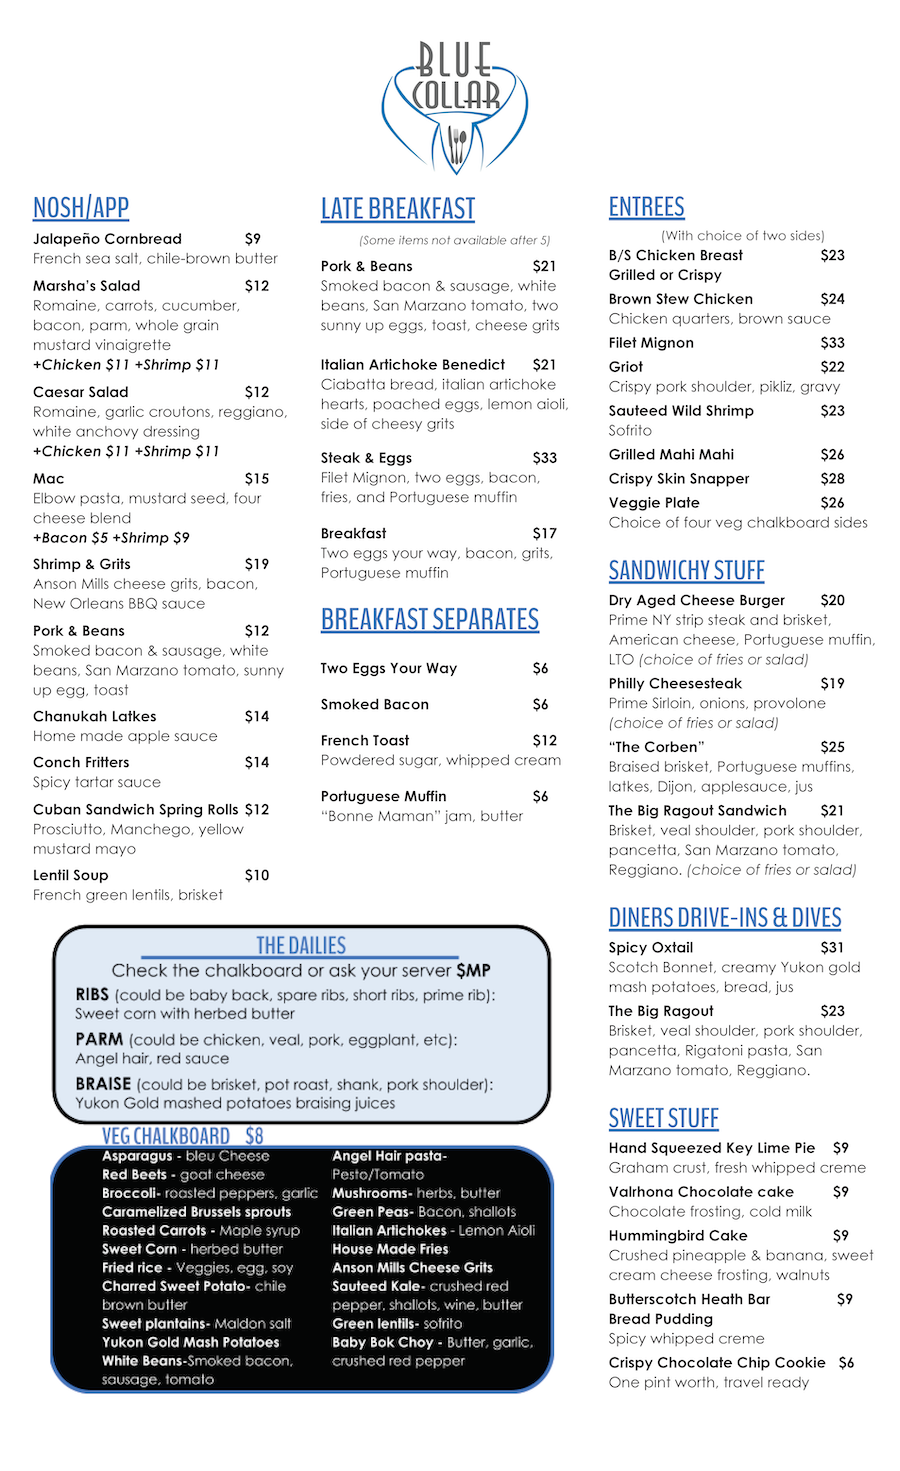 Daily Menu from Blue Collar in Miami, Florida